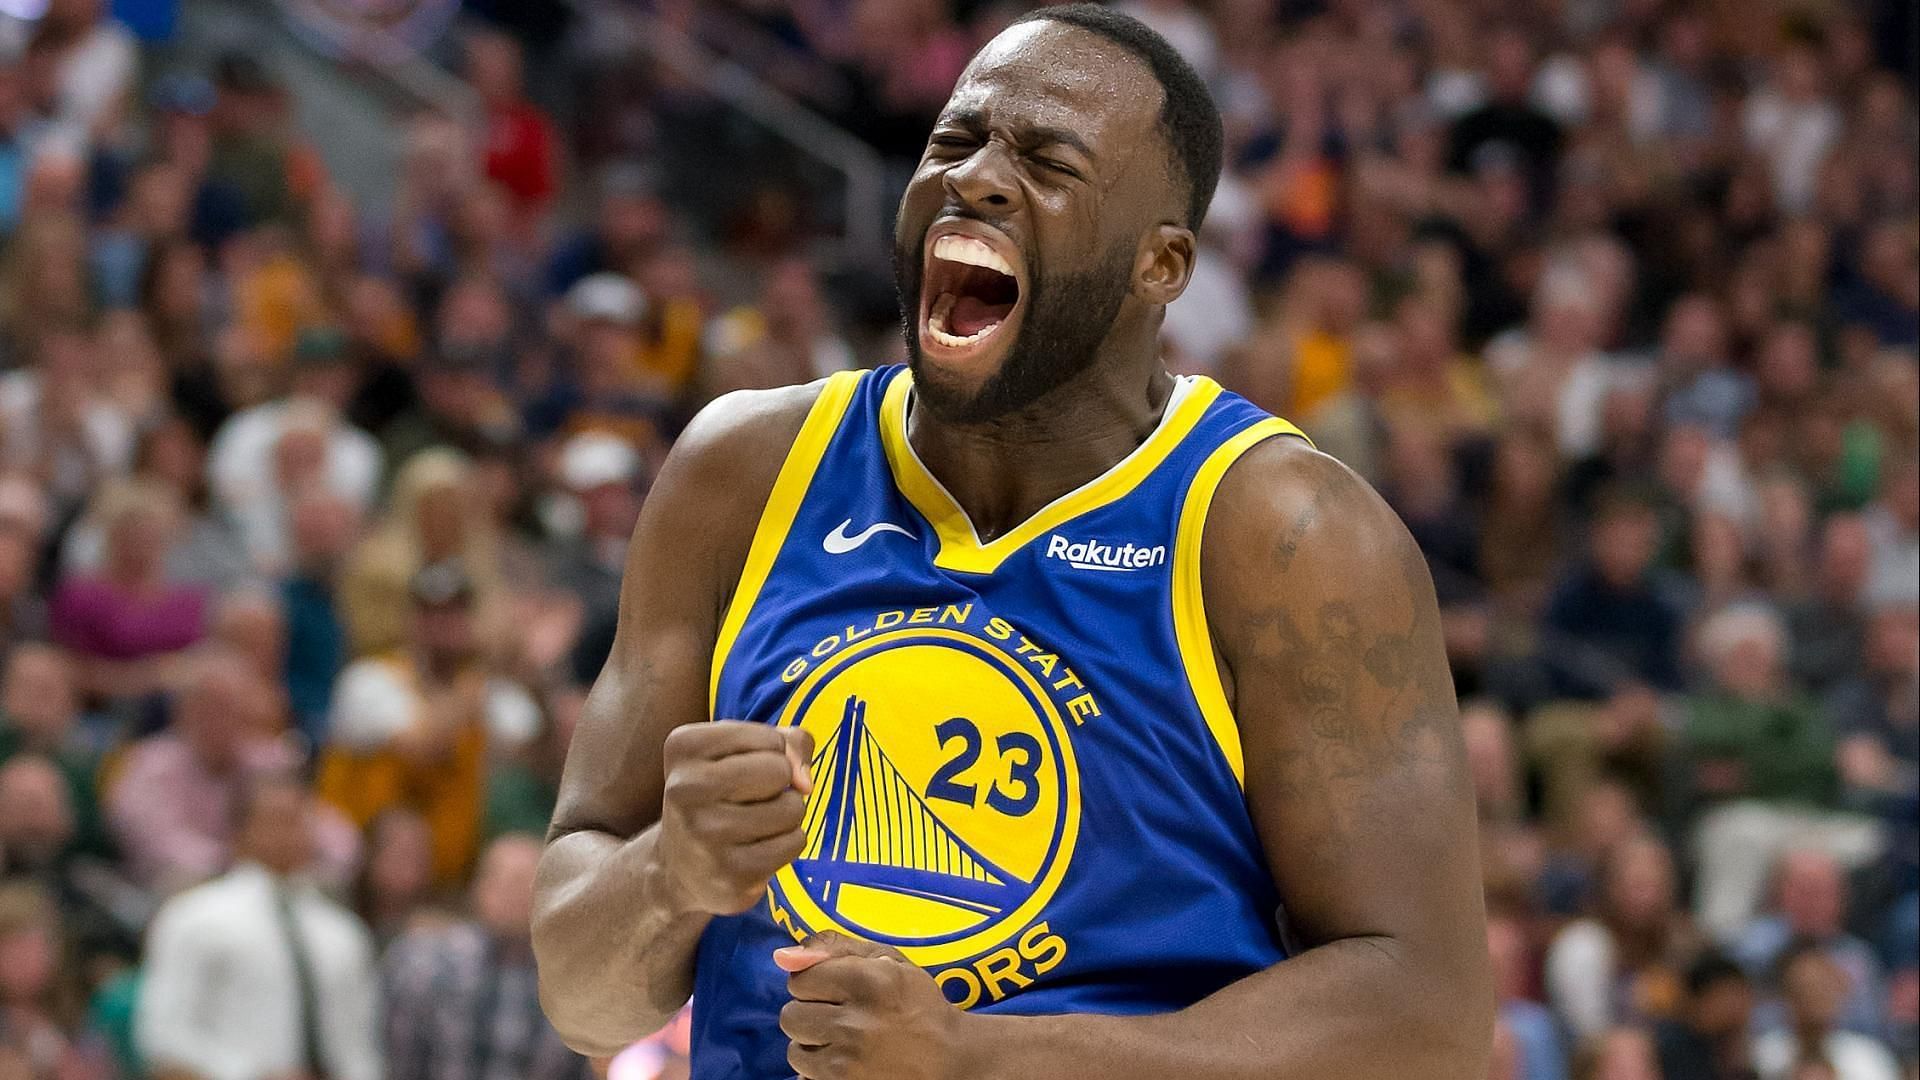 Draymond Green is never afraid to give comments on any issue. [Photo: NBA.com]